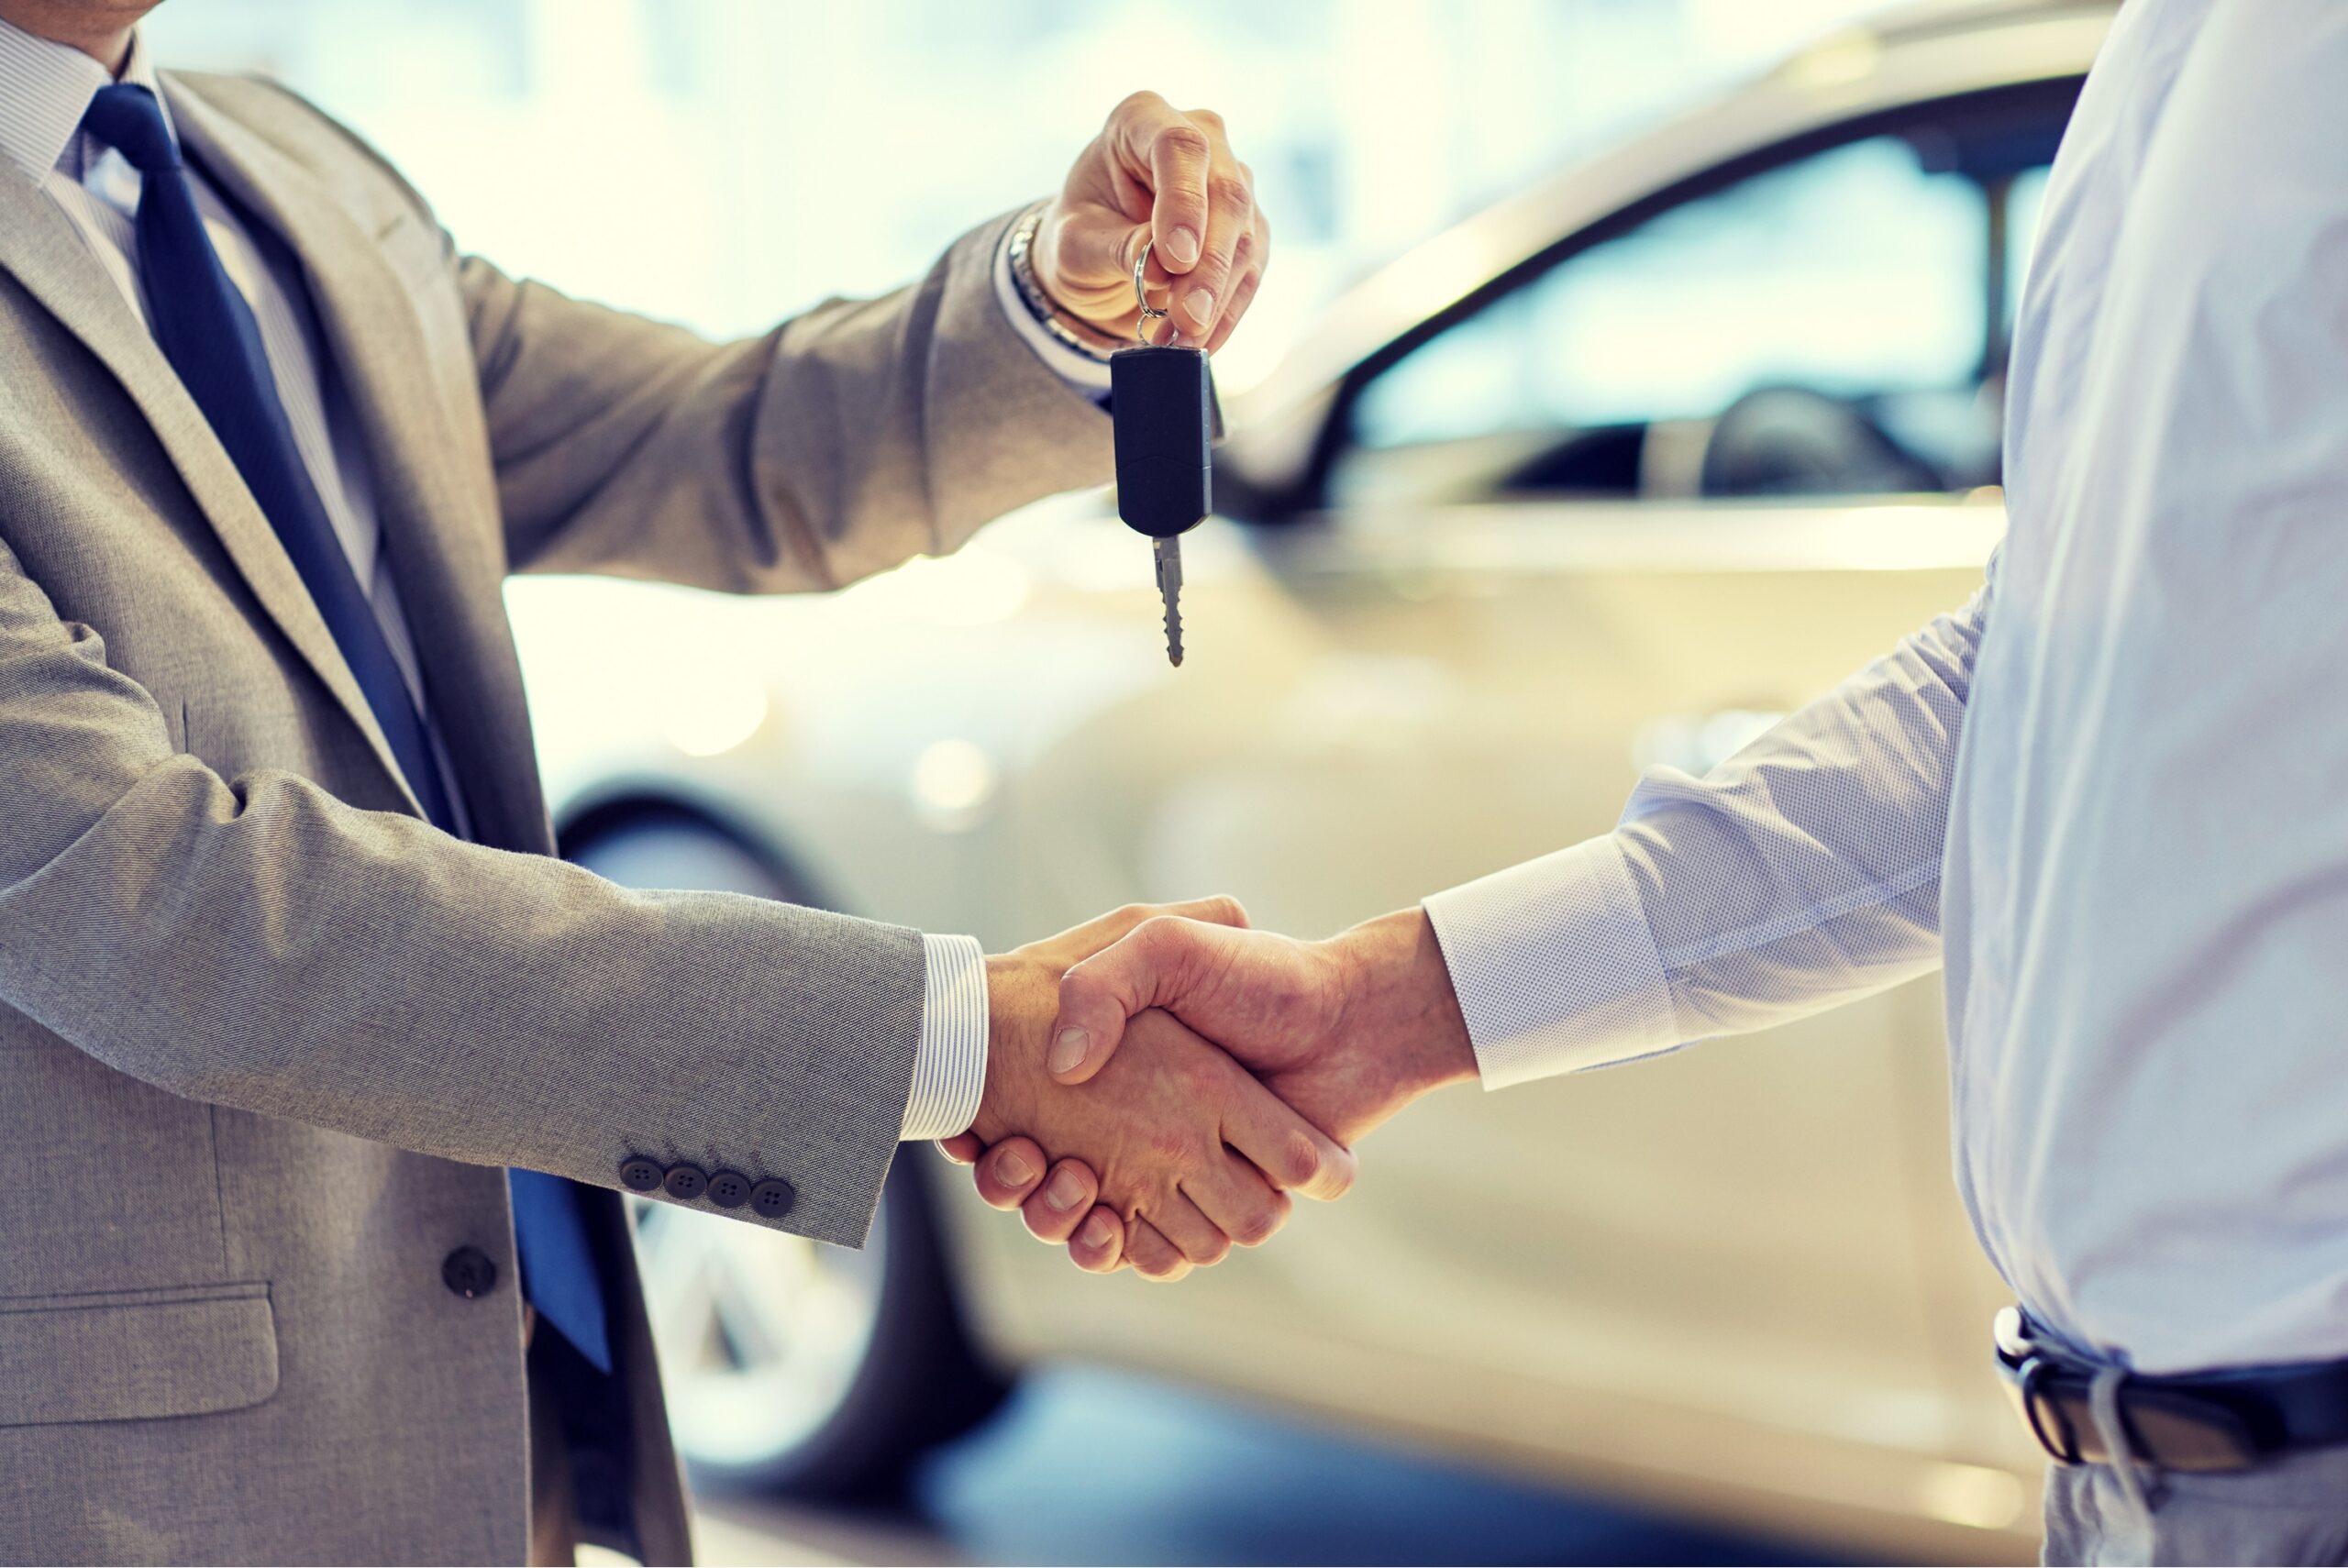 GET A CAR VALUATION BEFORE BUYING A USED CAR IN PERTH